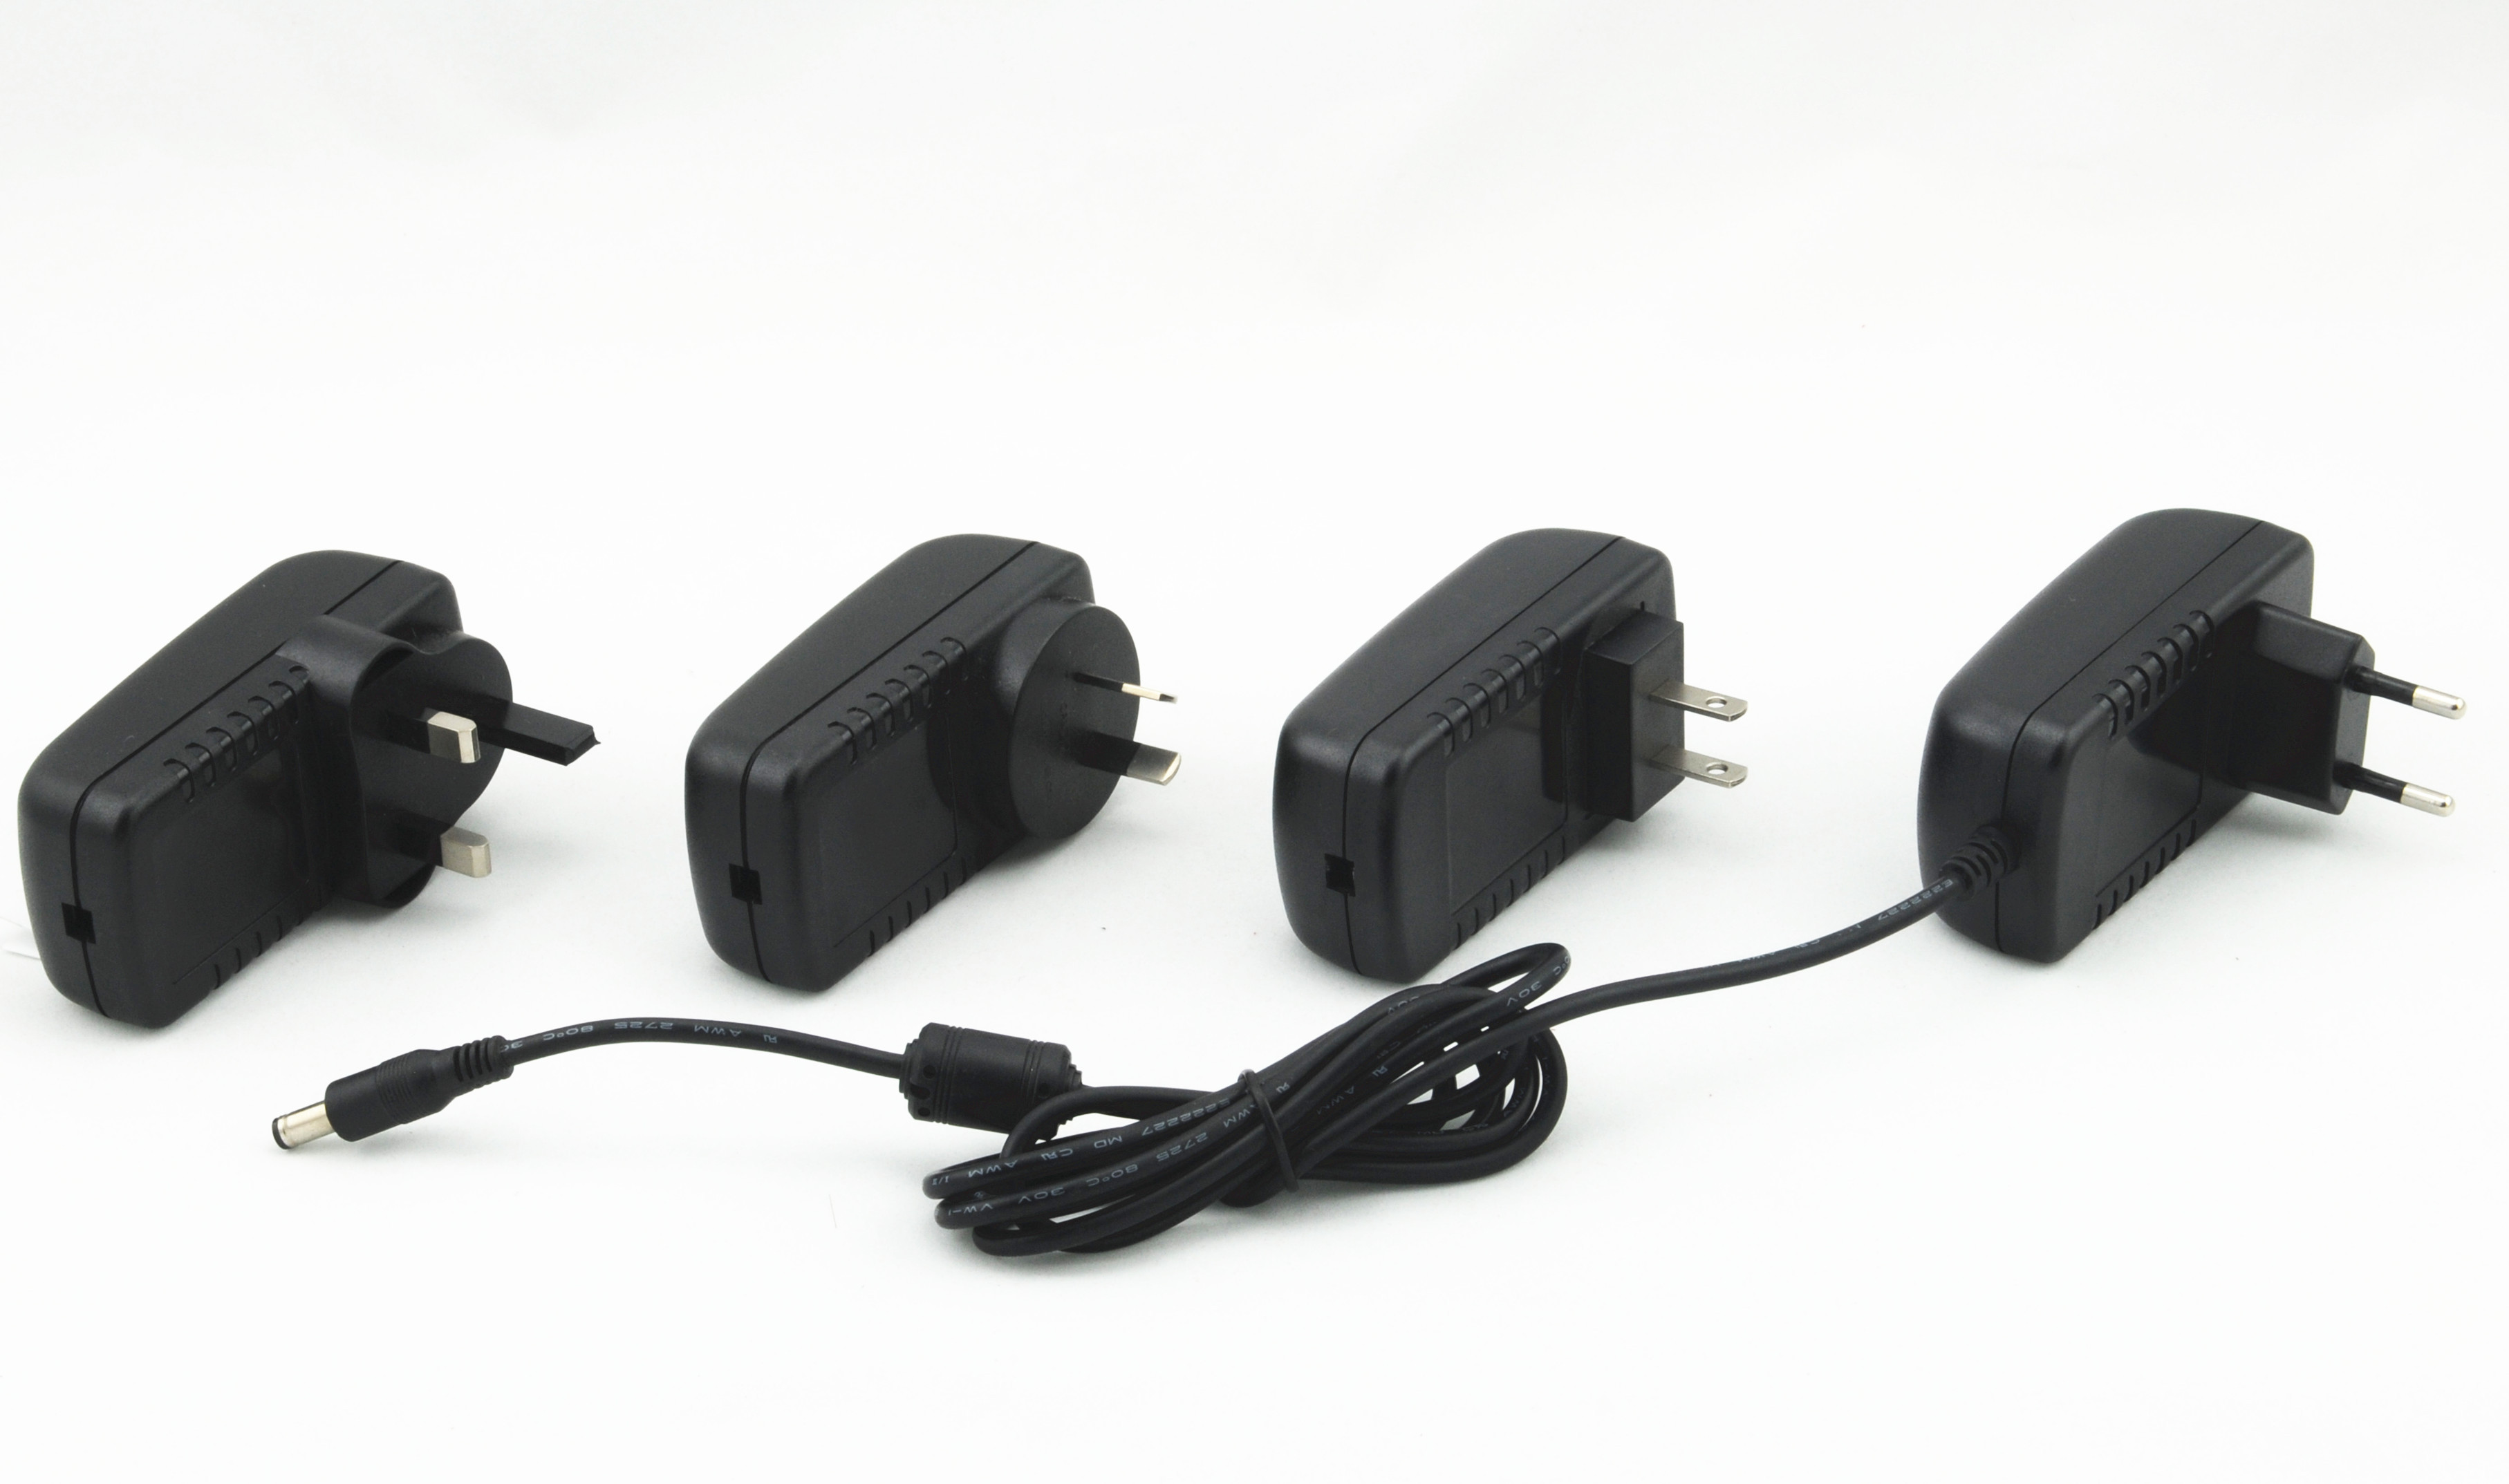 24W DC output AC Power Adapter untuk Digital Picture Frame, Telepon Video